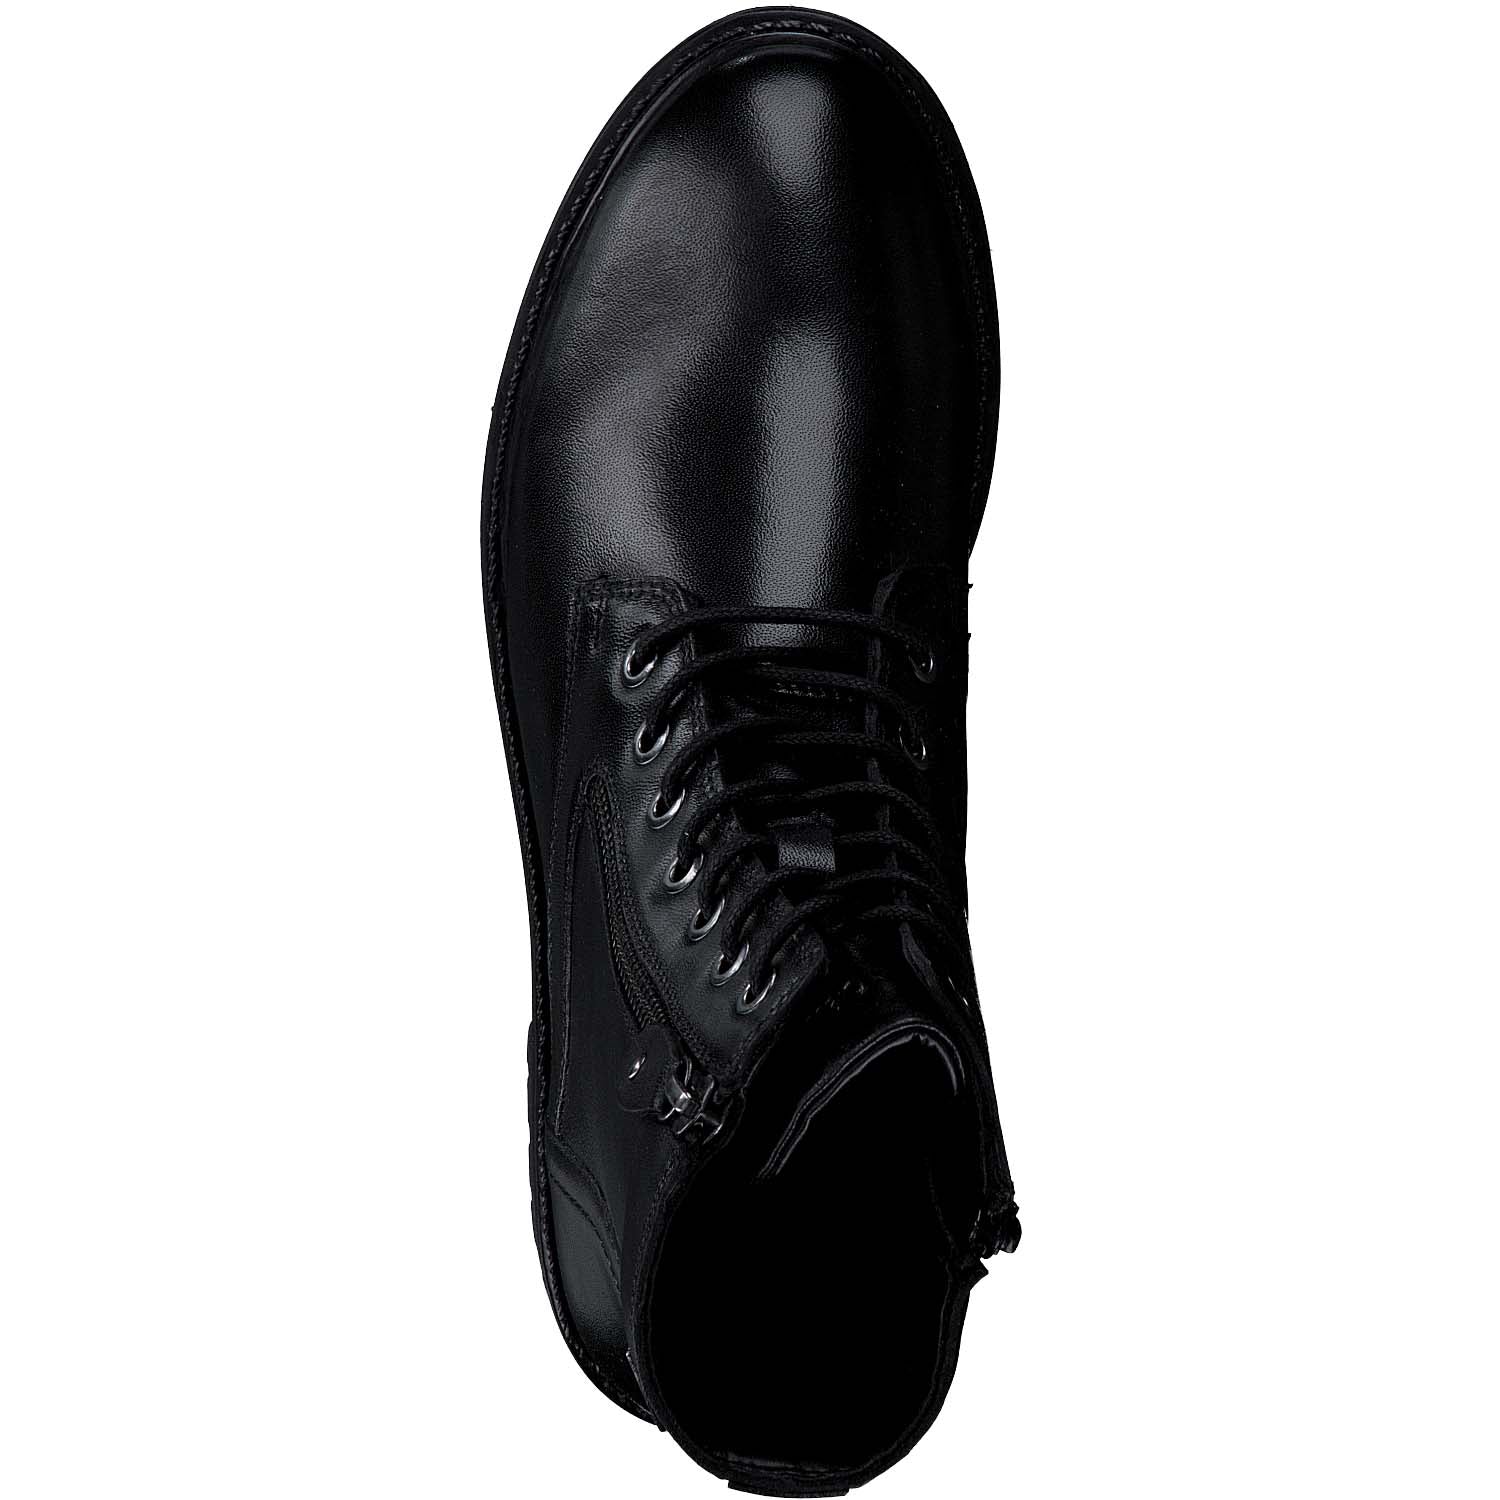 Overhead view showcasing the rounded toe of the S. Oliver boot.